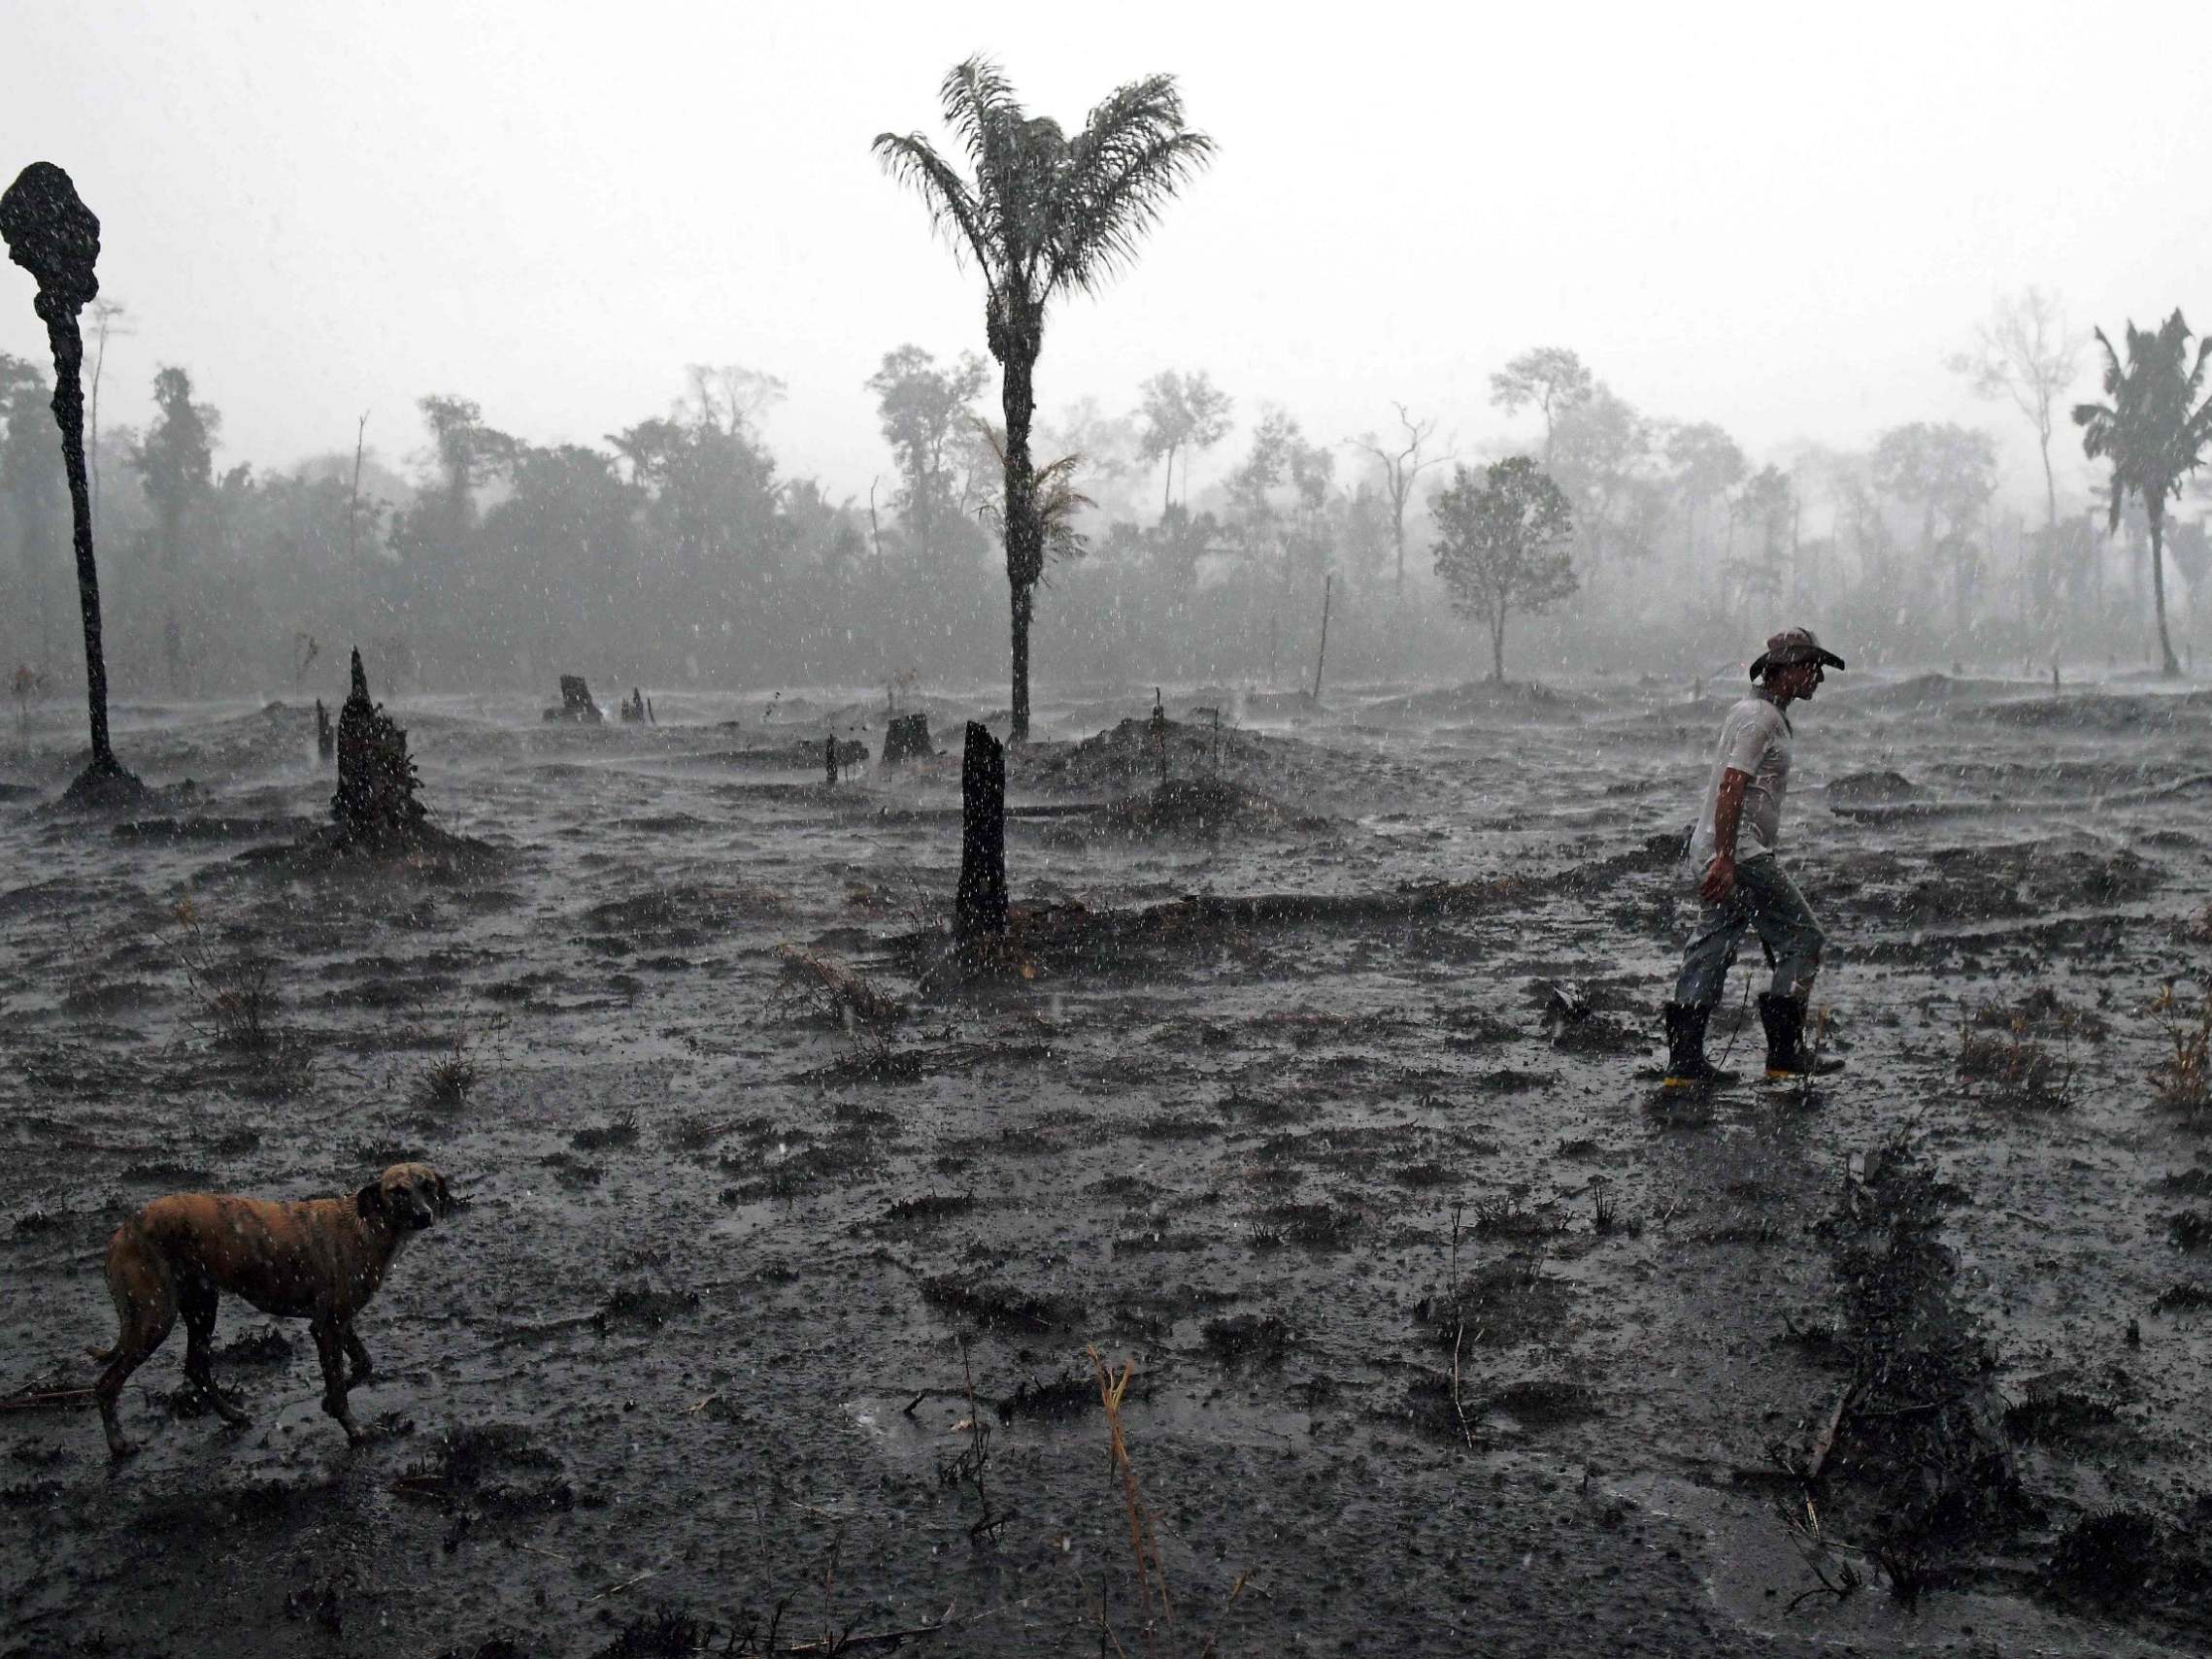 Swathes of the Amazon rainforest are turning to ashes as fires ravage the greenery